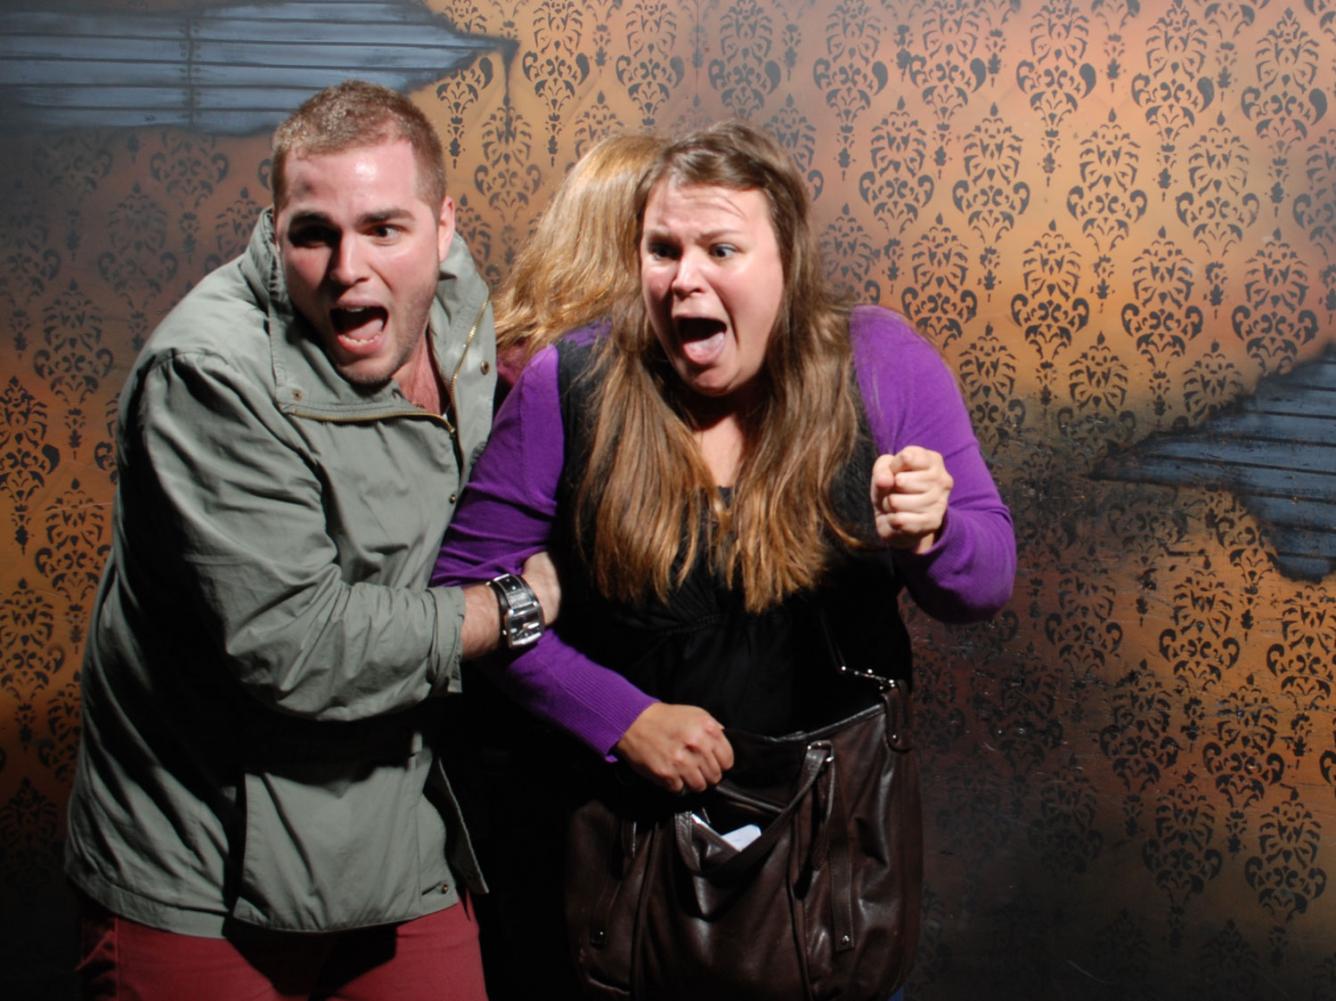 Nightmares Fear Factory Top 40 September 2013 pic0028